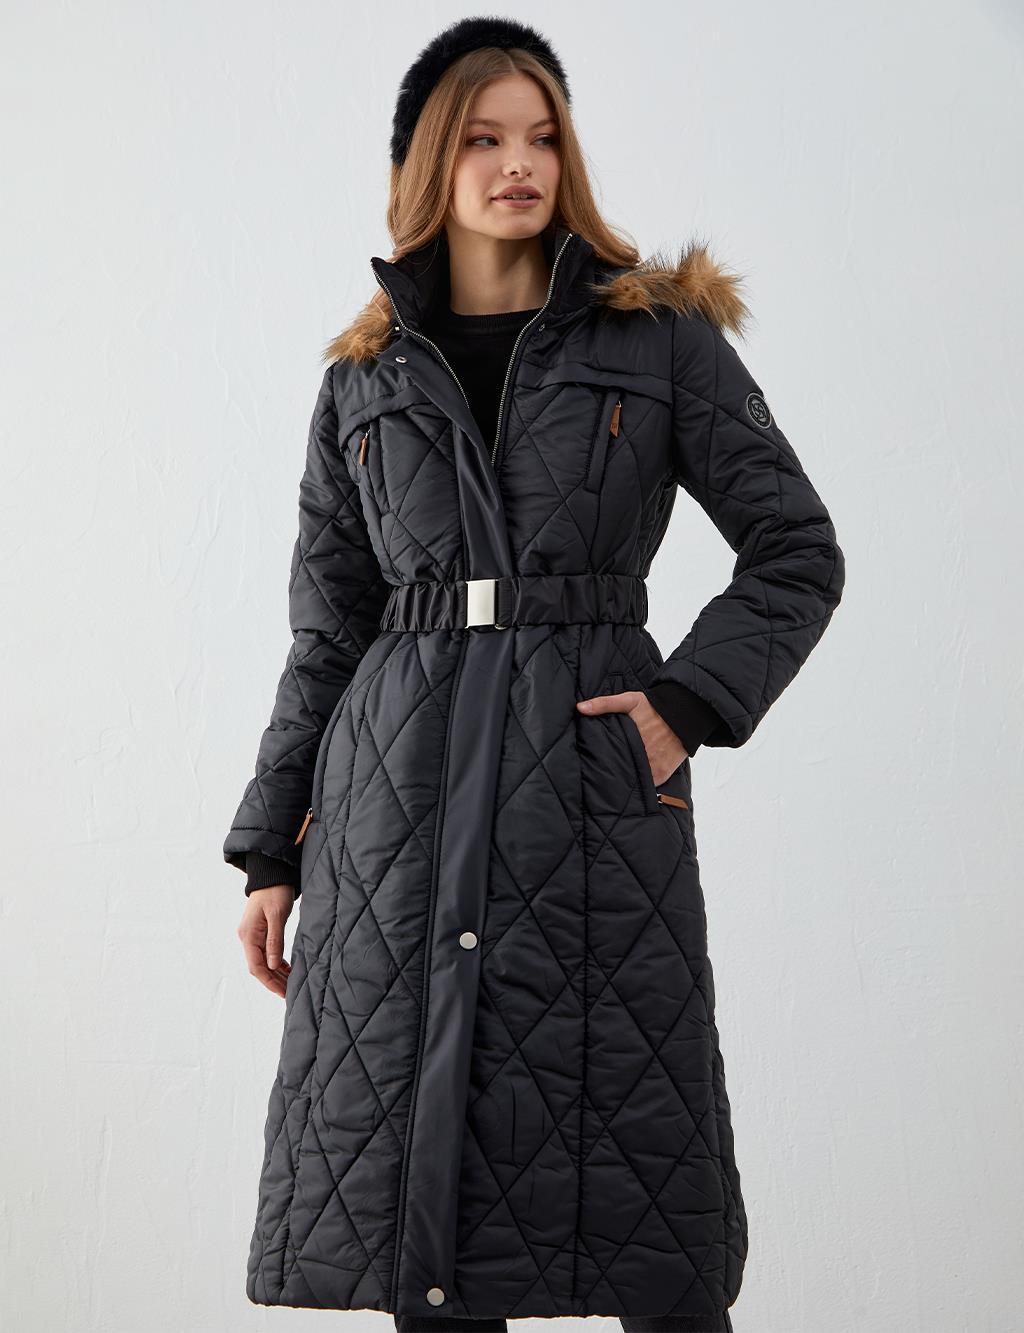 Diamond Patterned Quilted Inflatable Coat Black